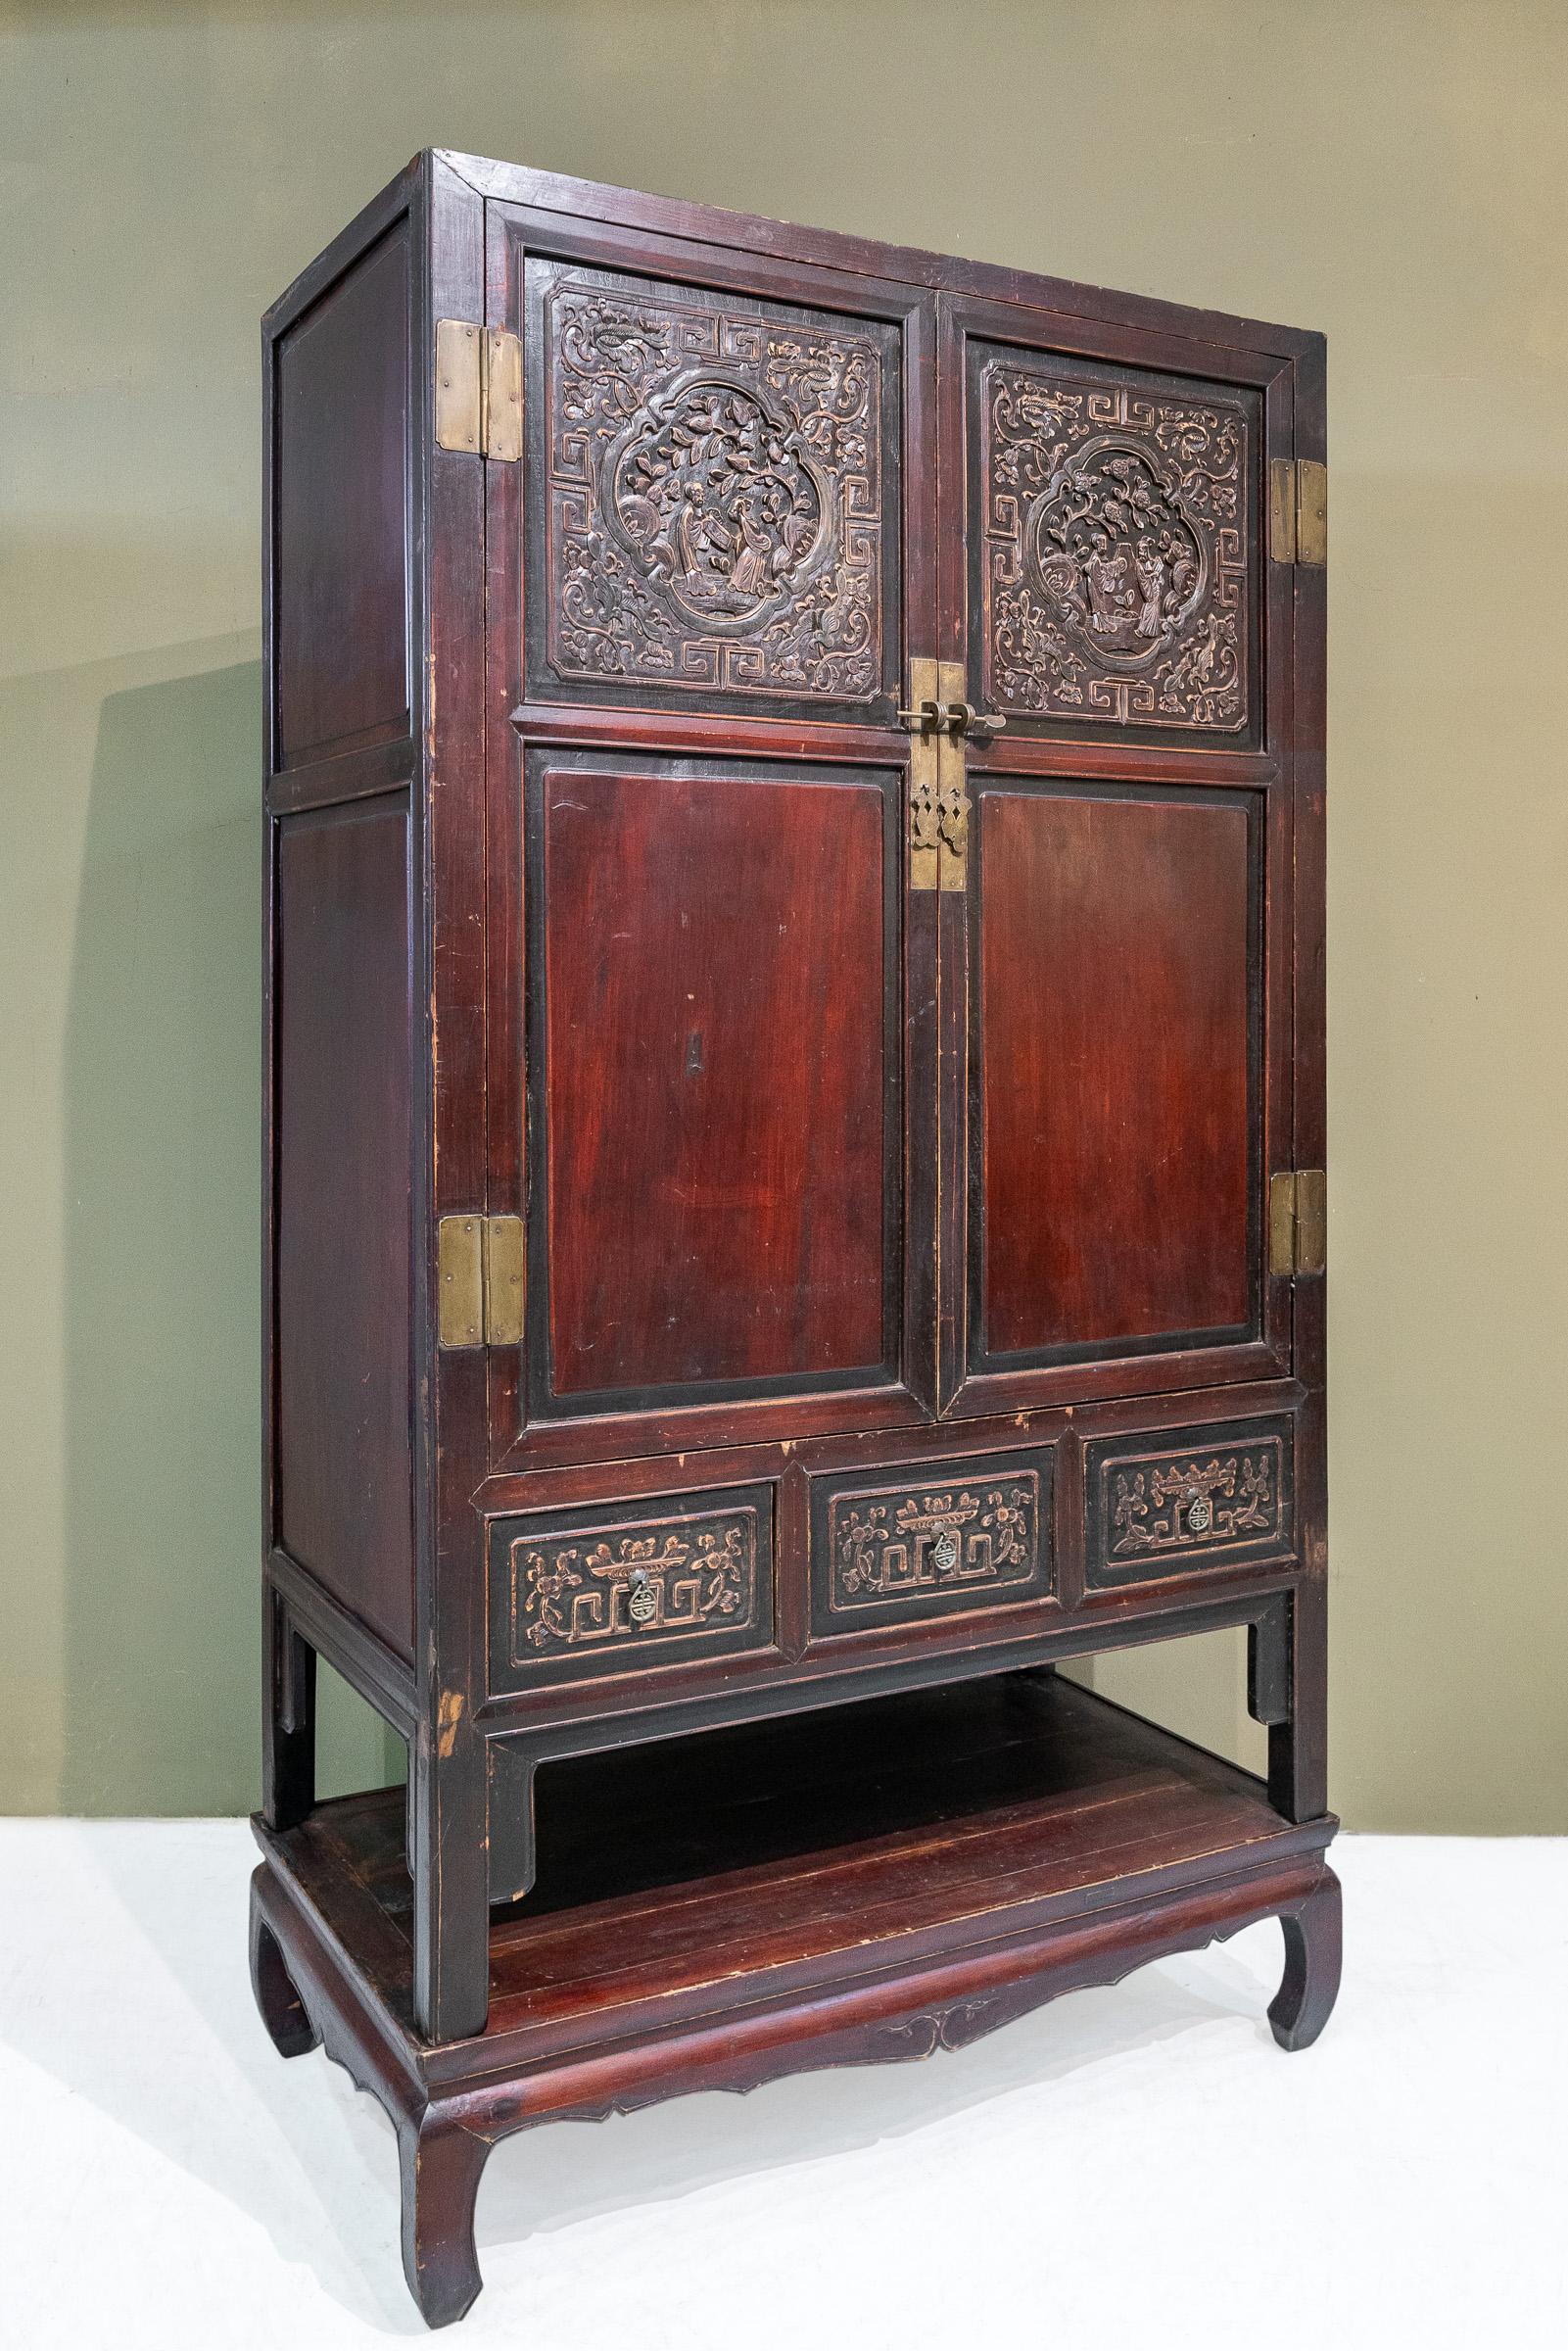 An early 20th century 2-tier cabinet from Shaoxing city, Zhejiang province, China. The carvings on the top part of the doors feature two couples in the garden, one pair is appreciating a painting and another pair is appreciating music. These two